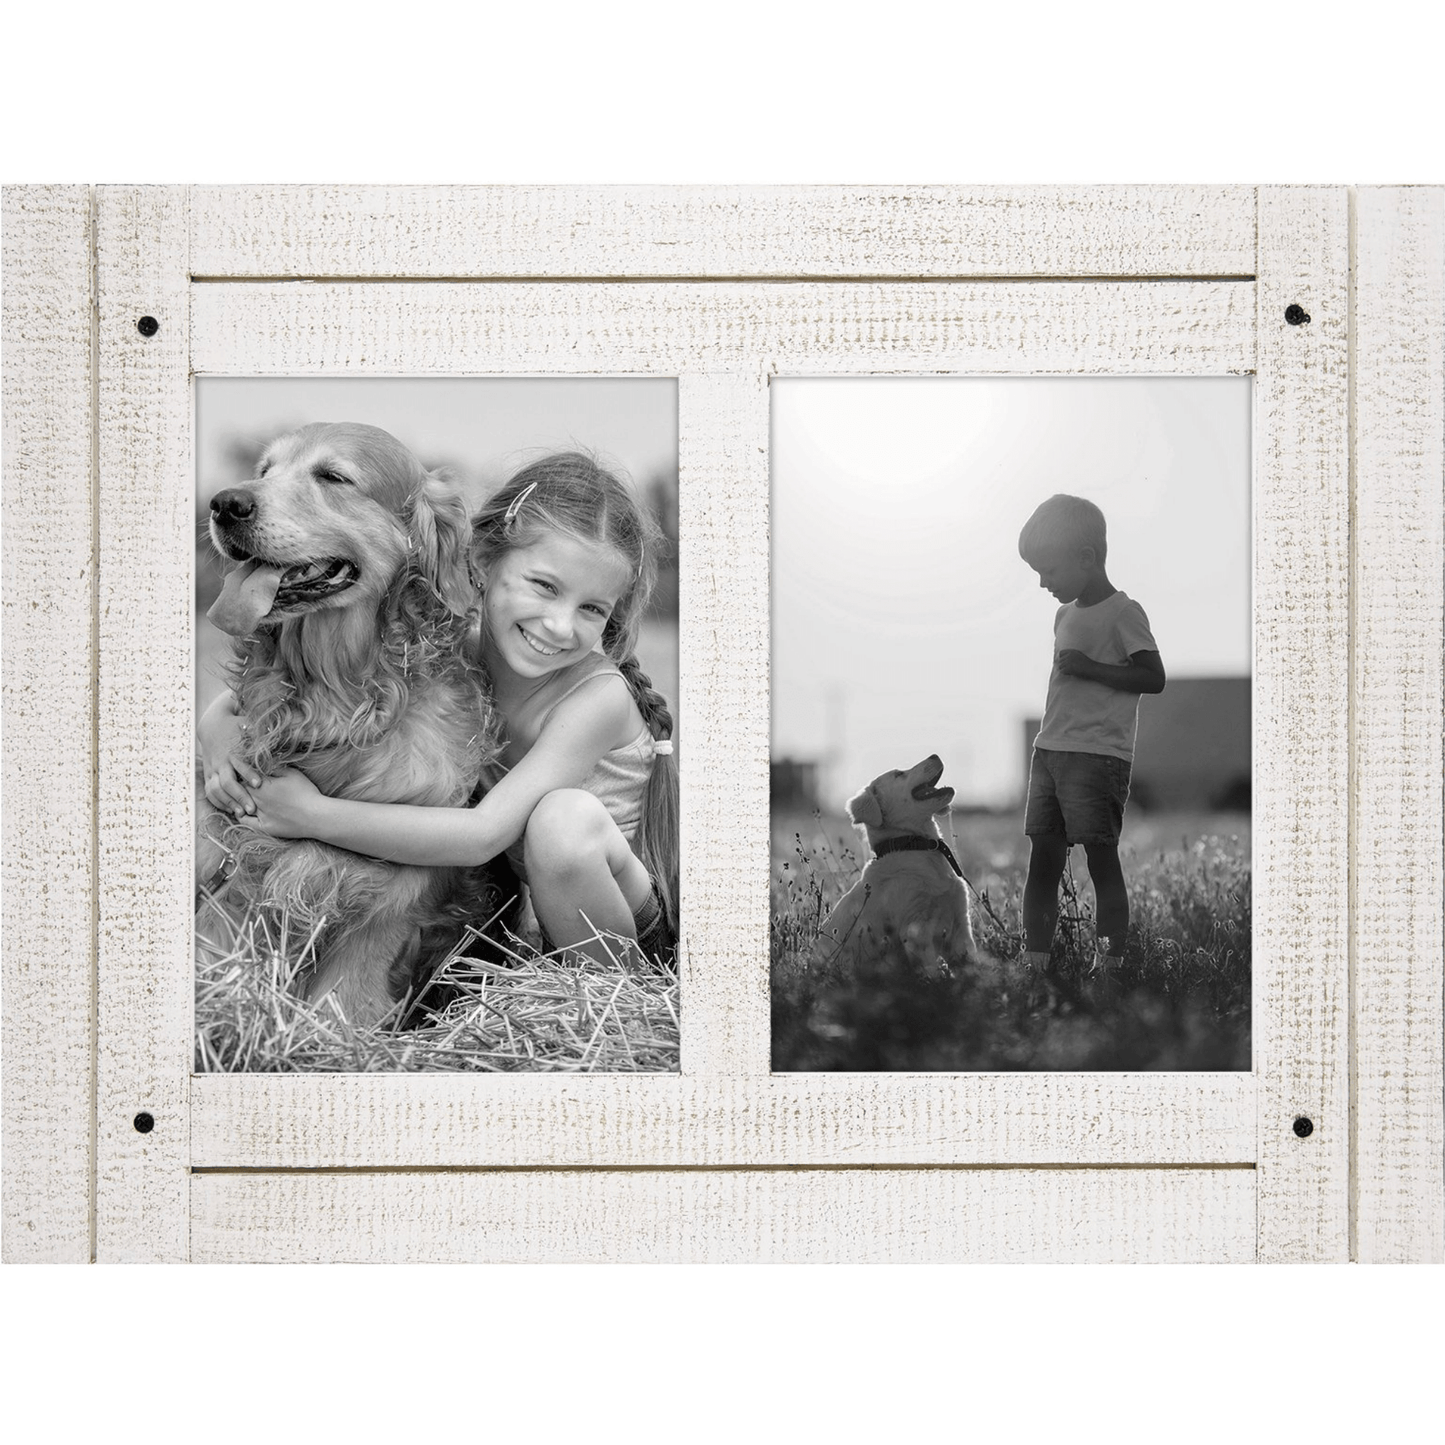 Rustic Picture Frame with Textured Wood | Choose Size and Color